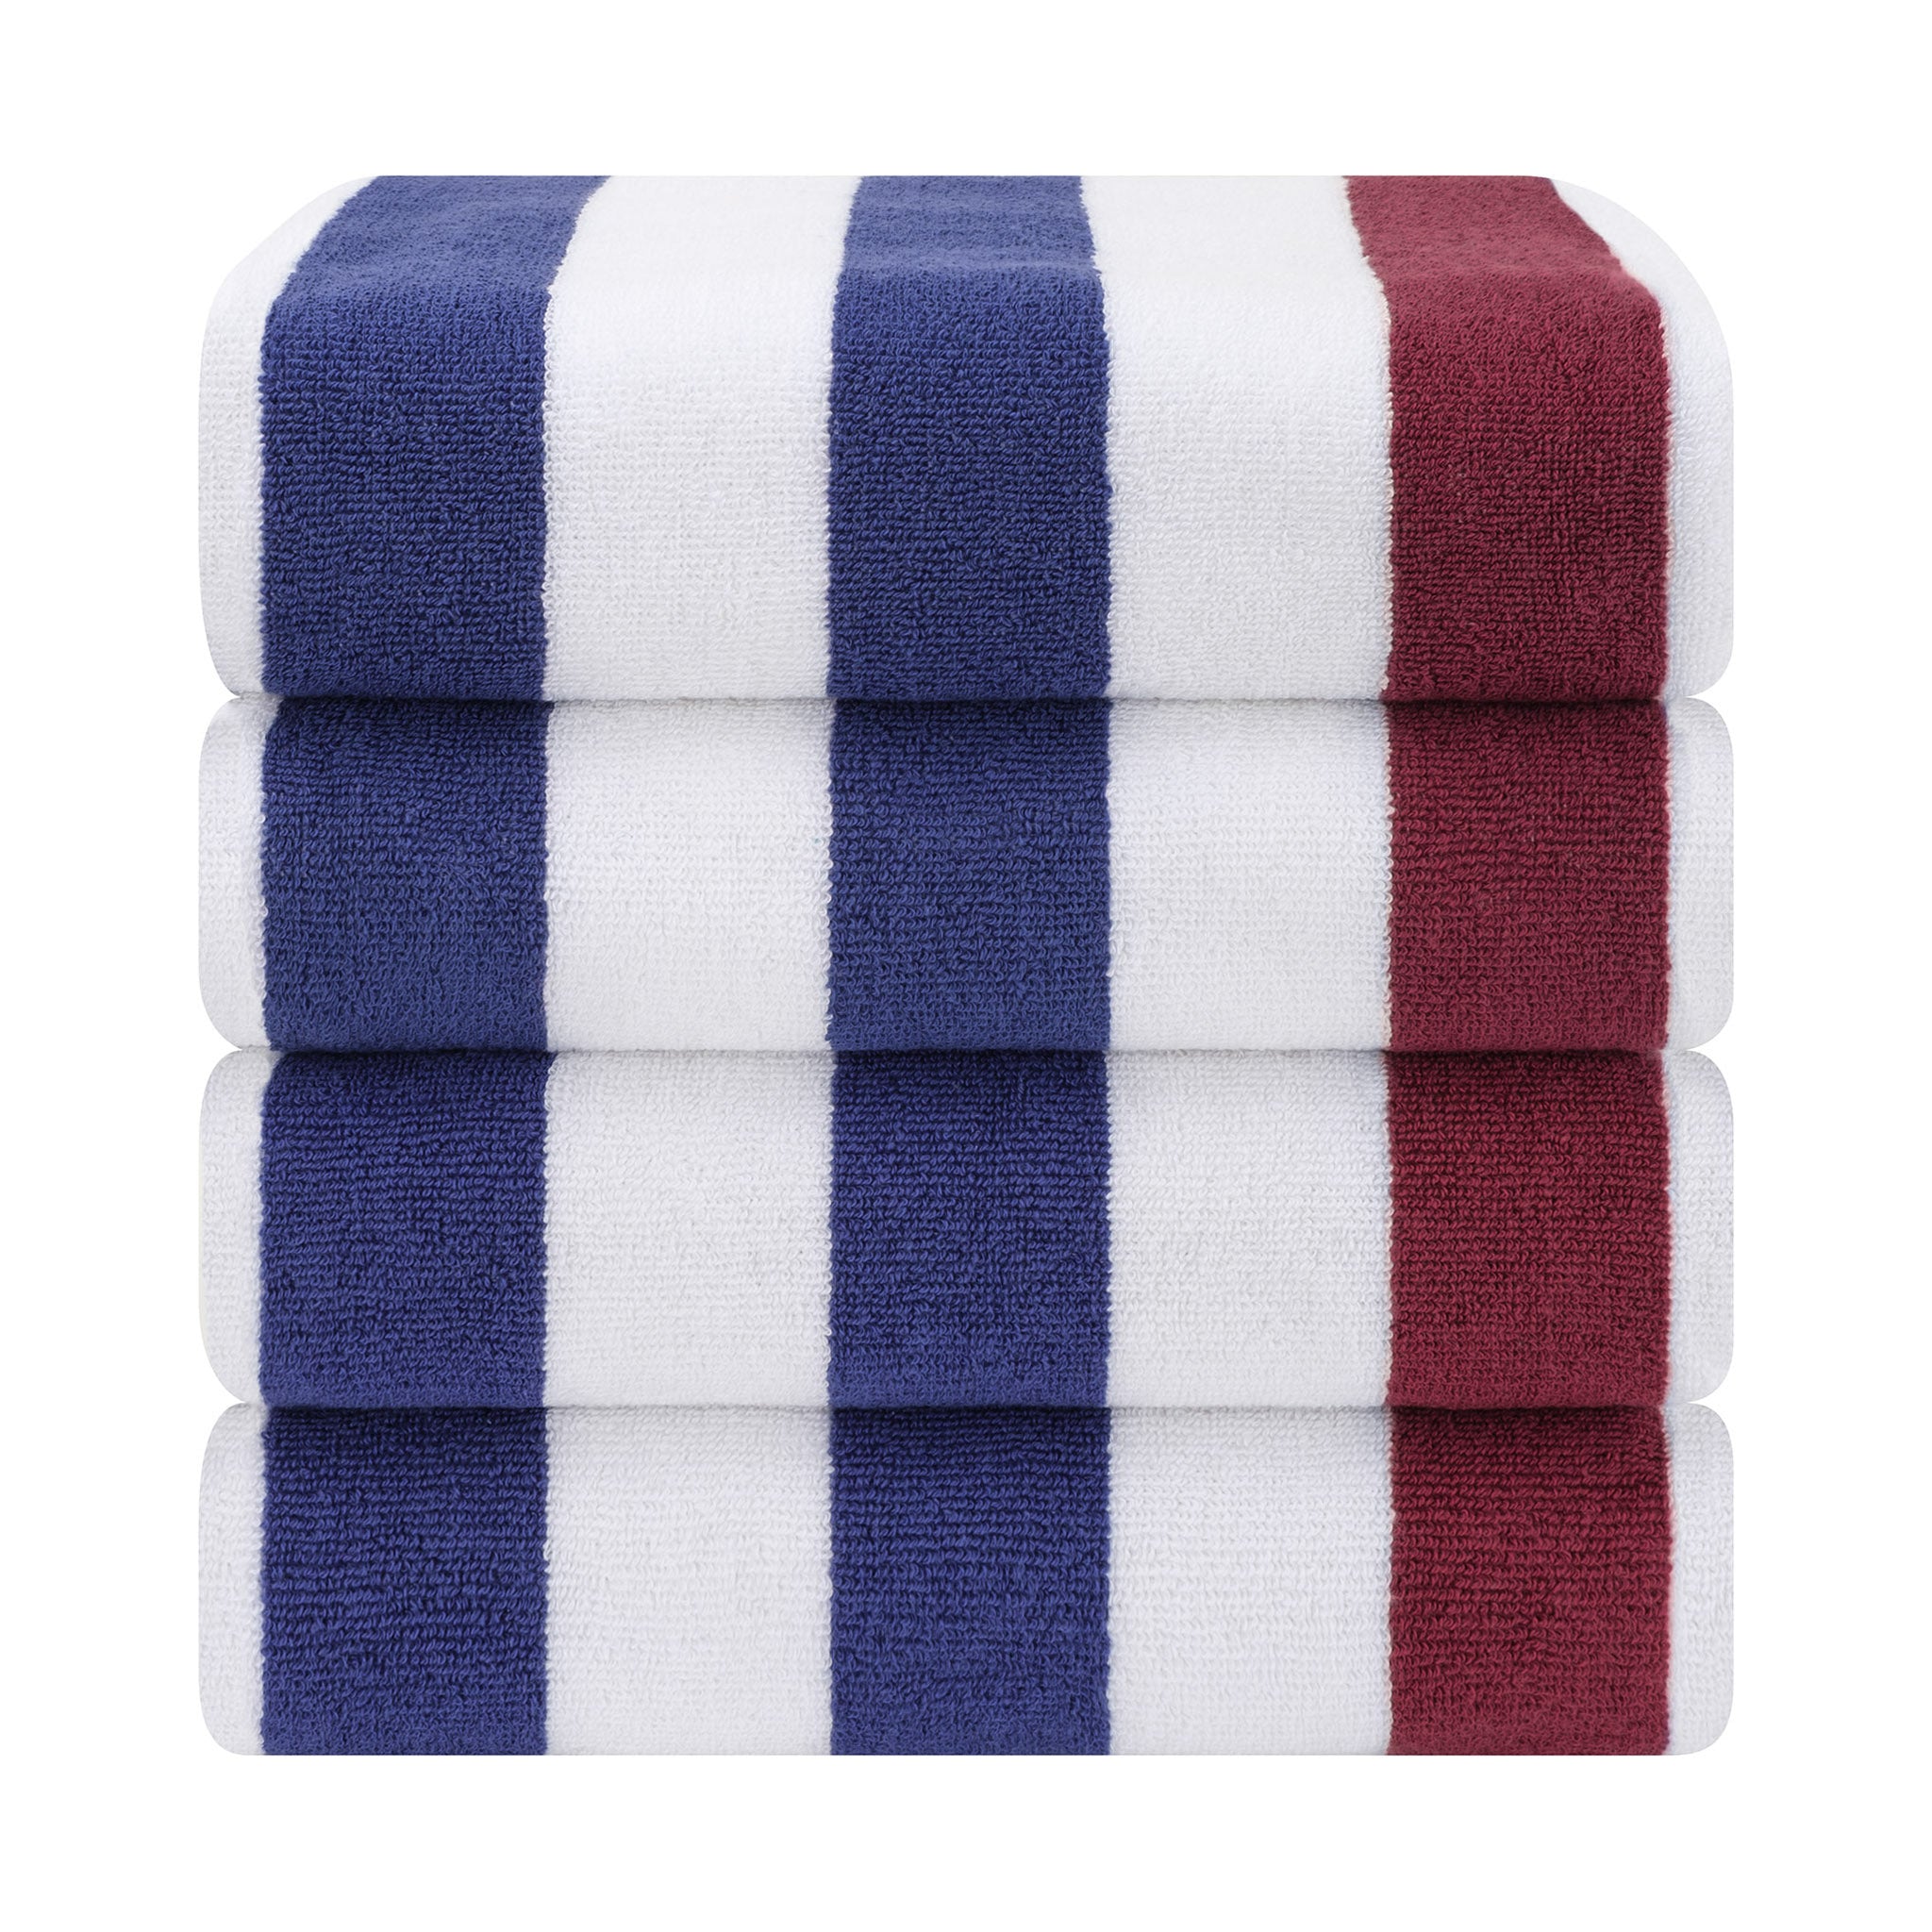 American Soft Linen 100% Cotton 4 Pack Beach Towels Cabana Striped Pool Towels -navy-bordeaux-2